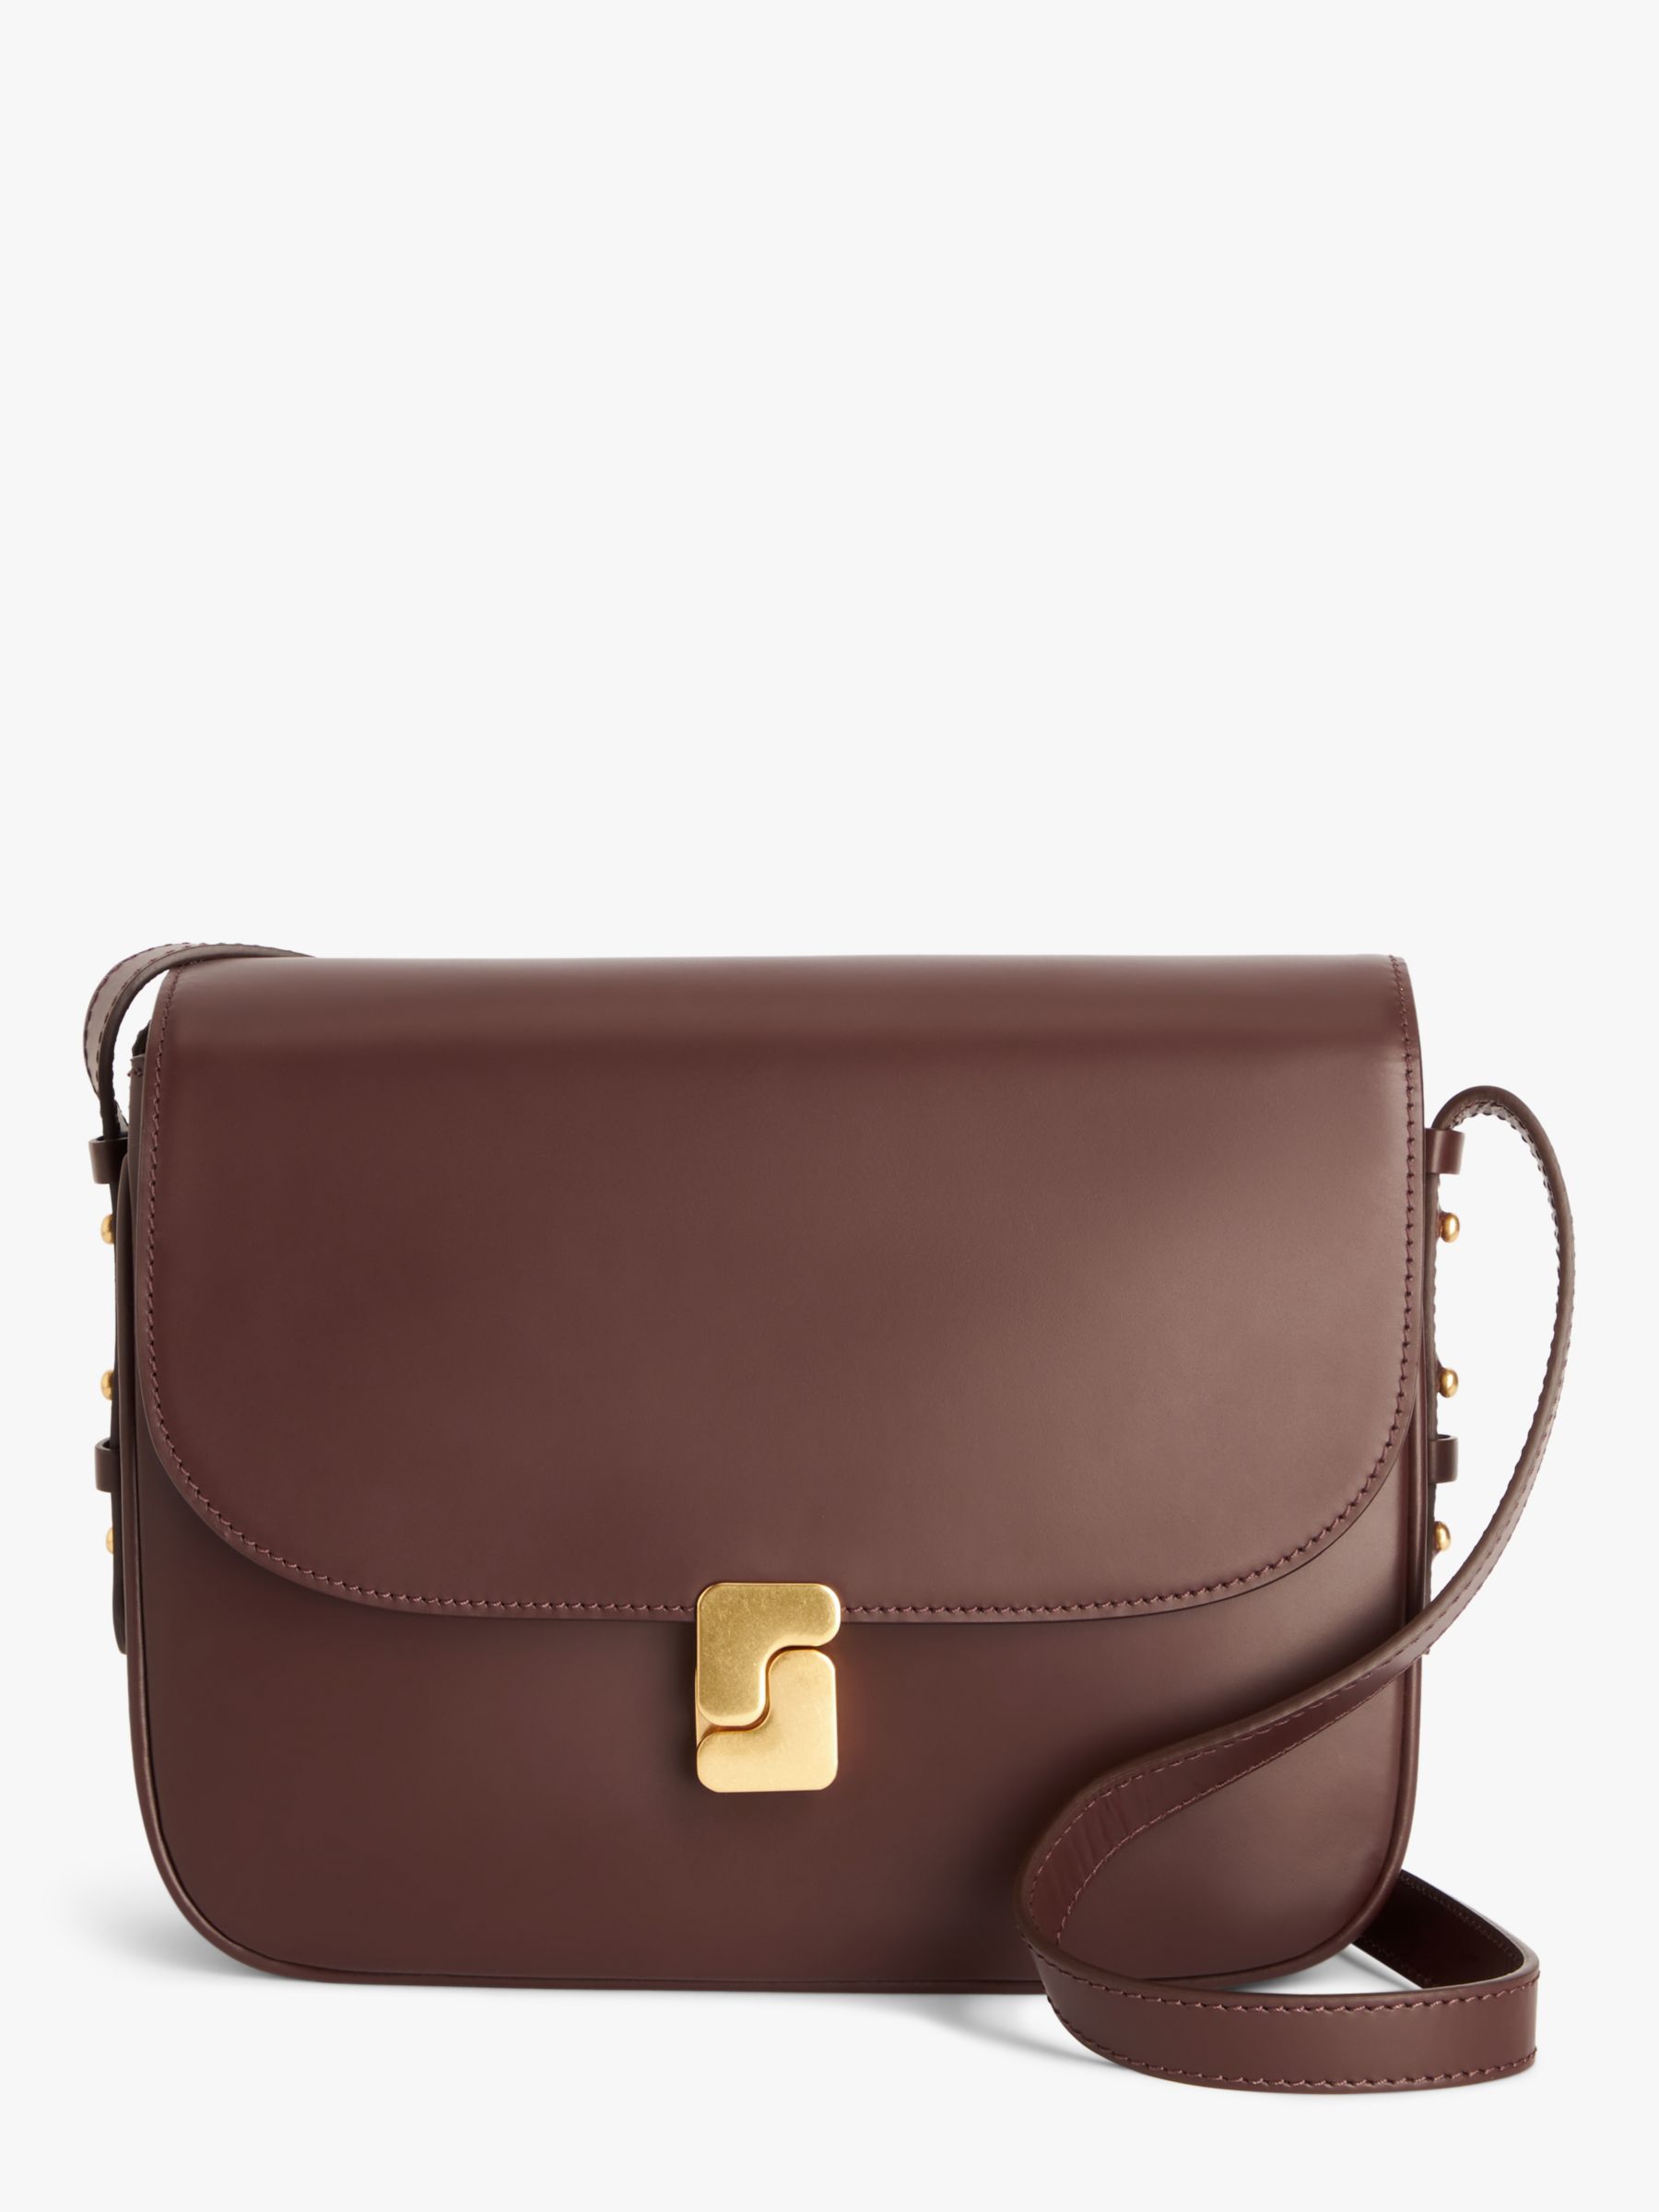 Outfit Inspo: Celine Classic Box in Brown